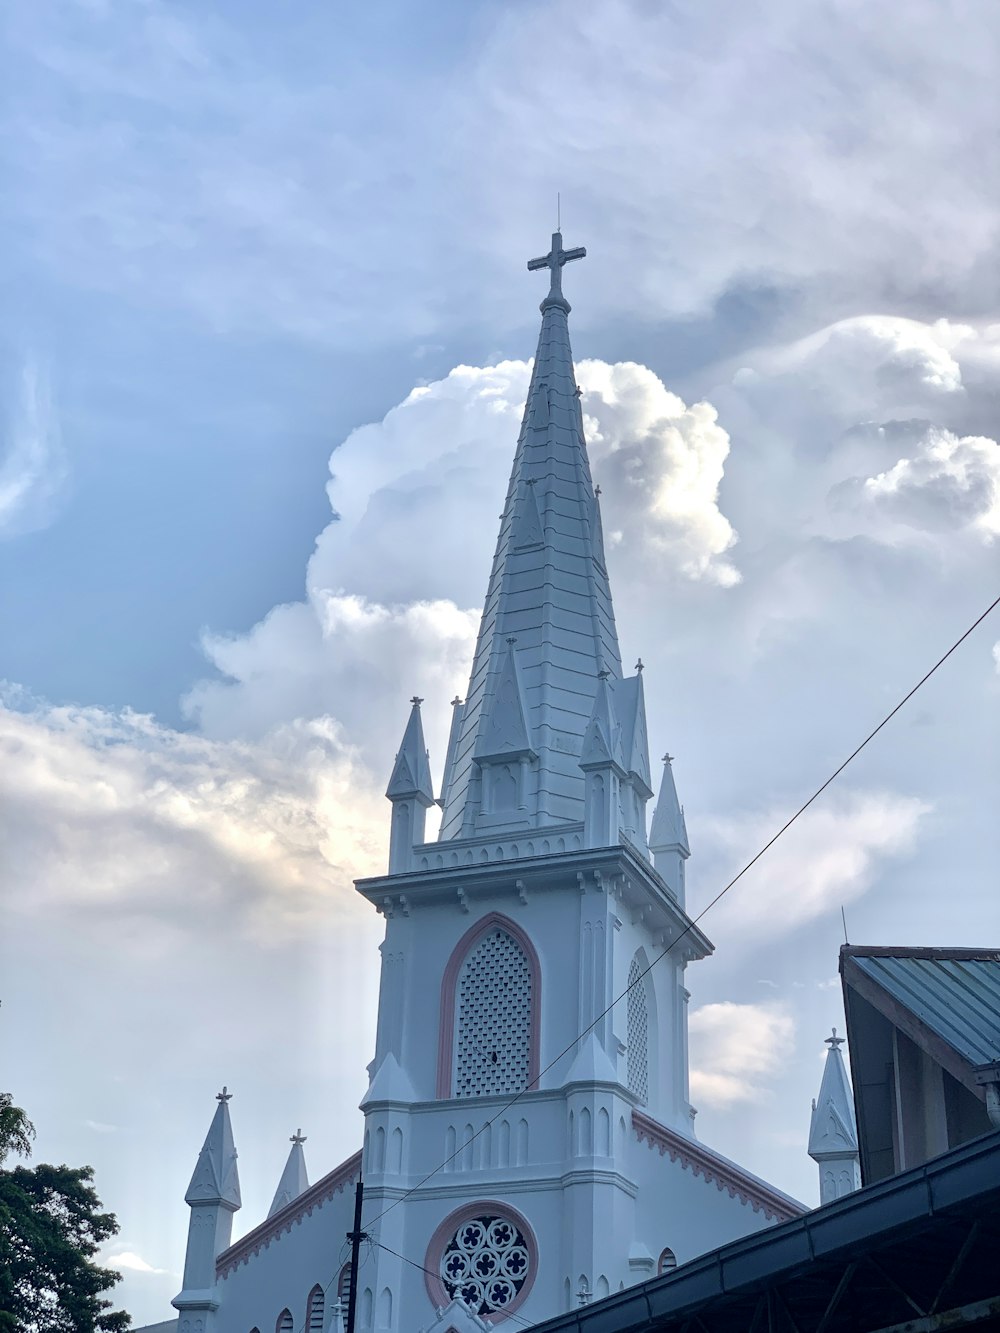 white and black church under white clouds and blue sky during daytime